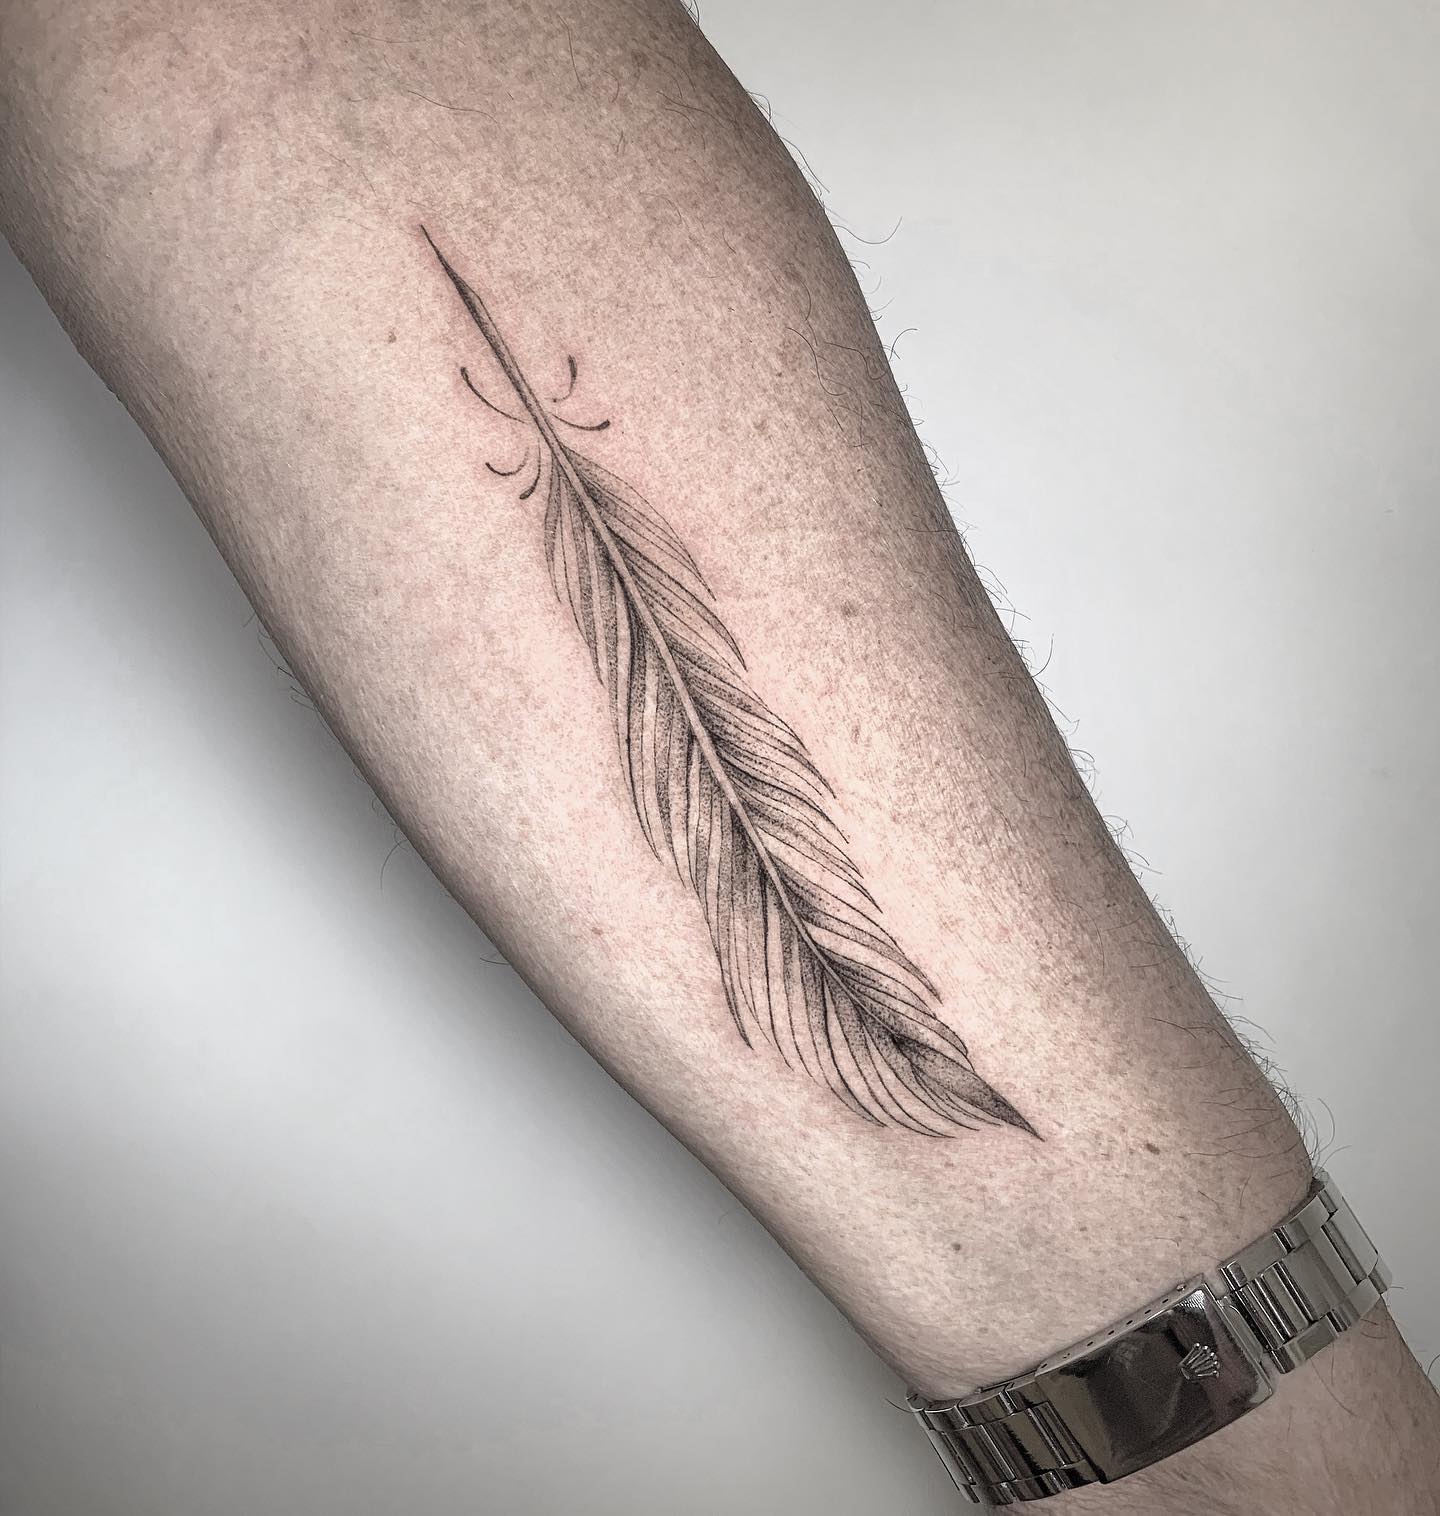 All of these lines and dots turn a simple feather into an art piece. This tattoo proves everyone that there is a perfection in simplicity.